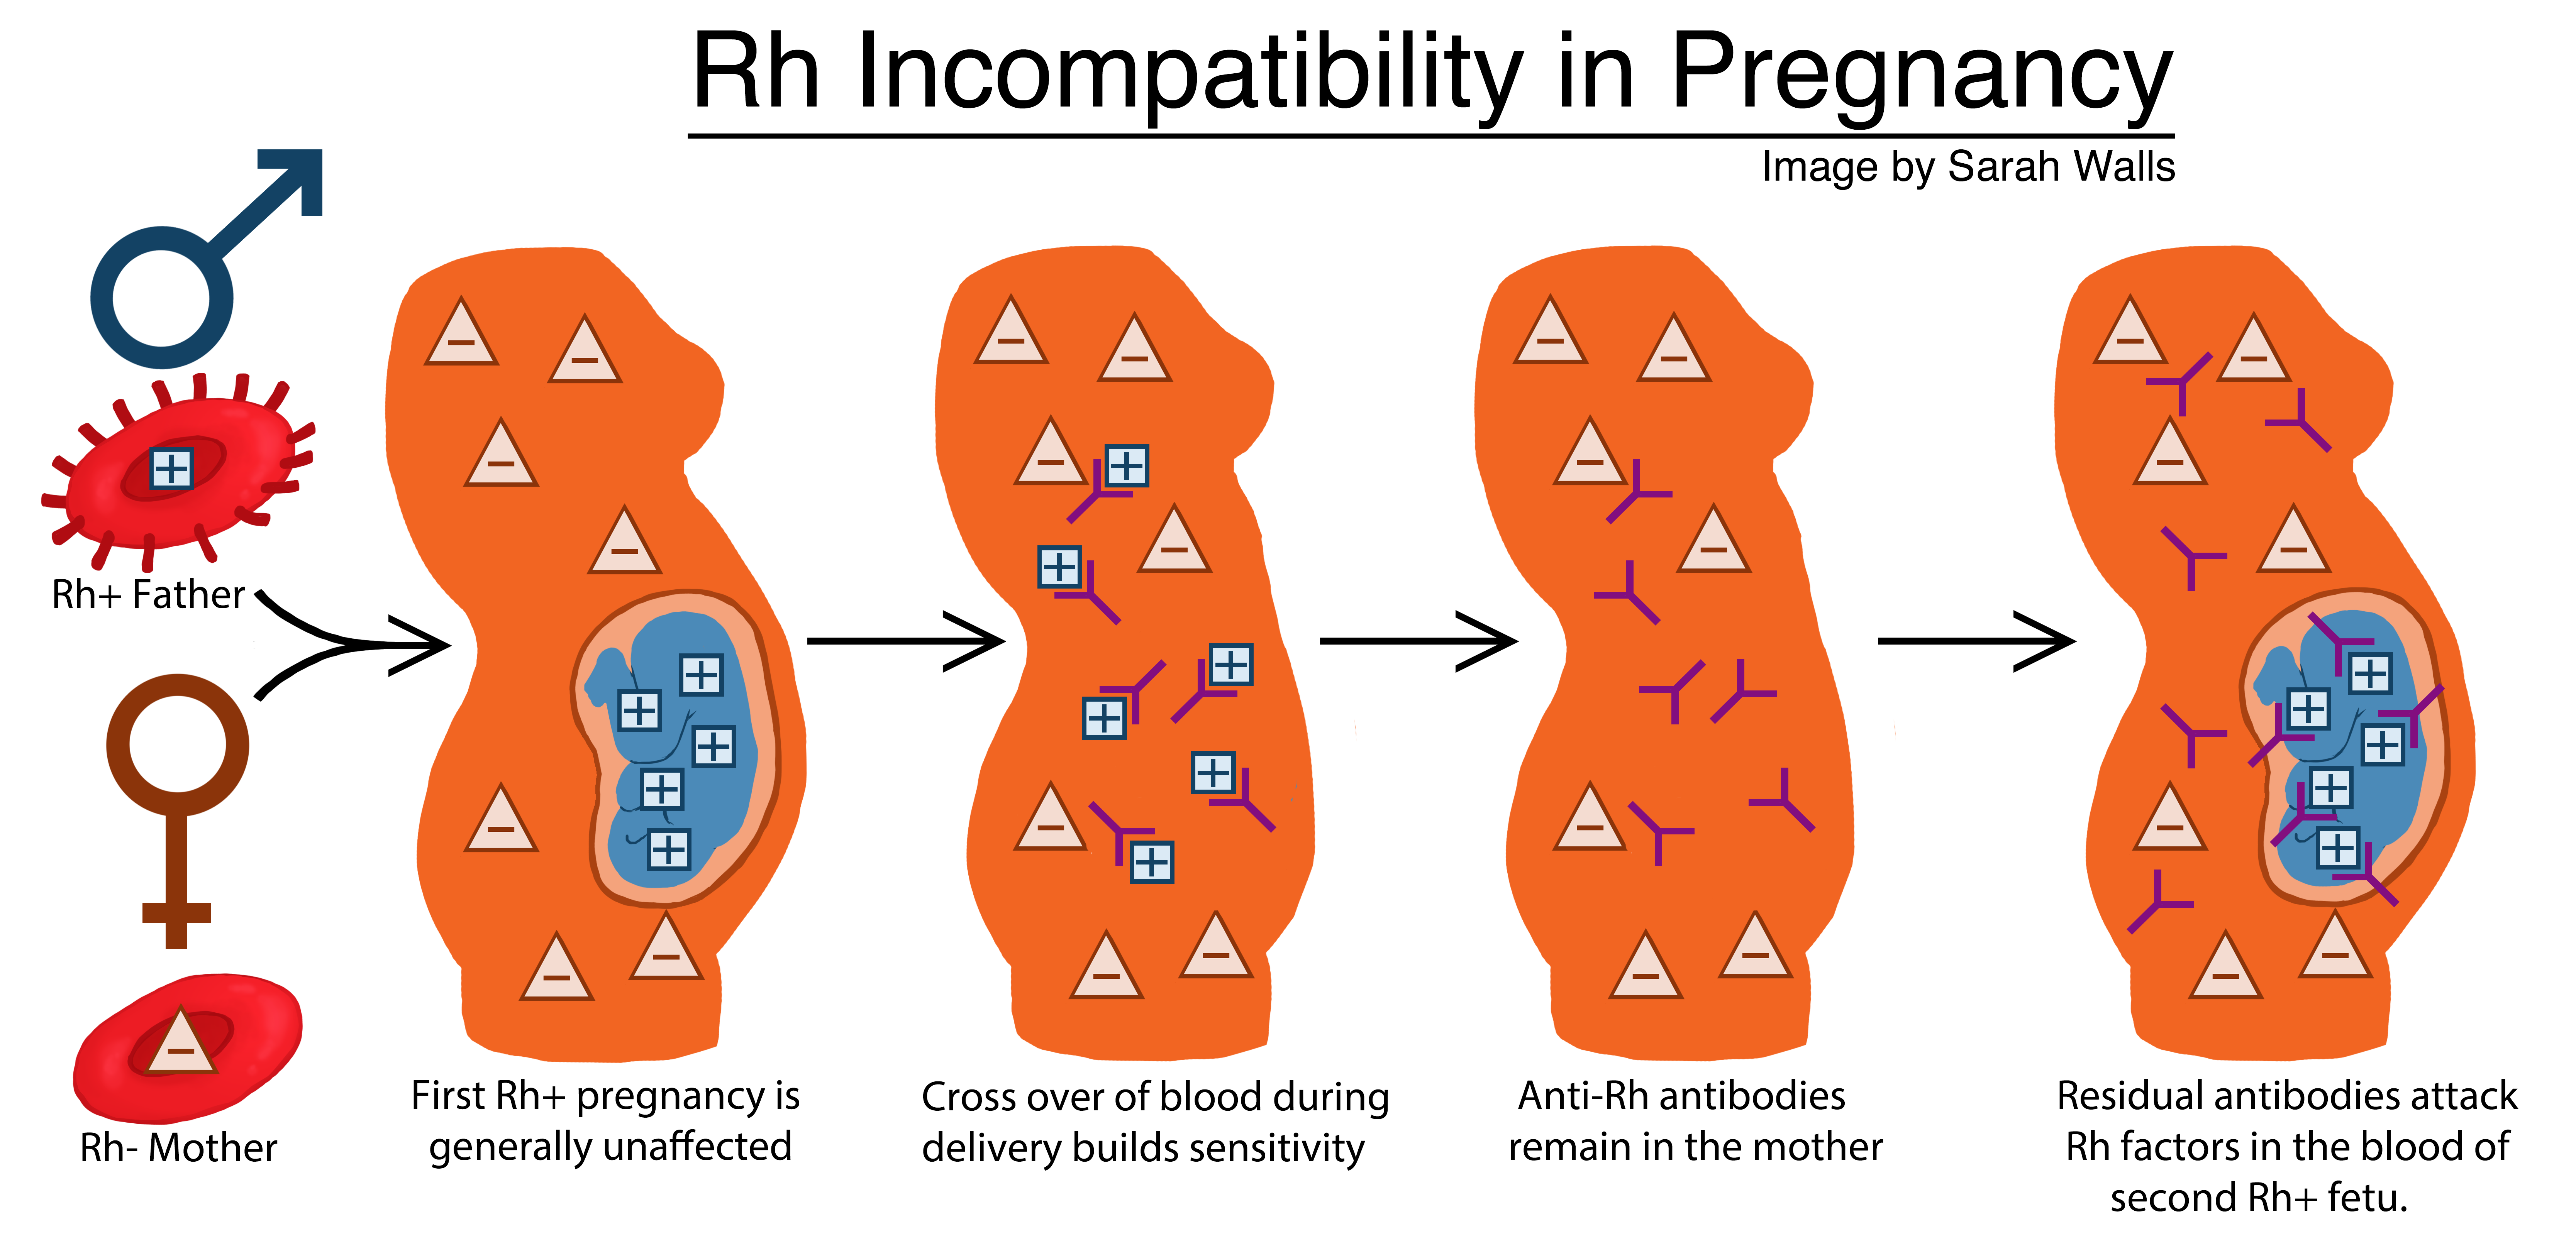 An illustration of Rh incompatibility in pregnancy